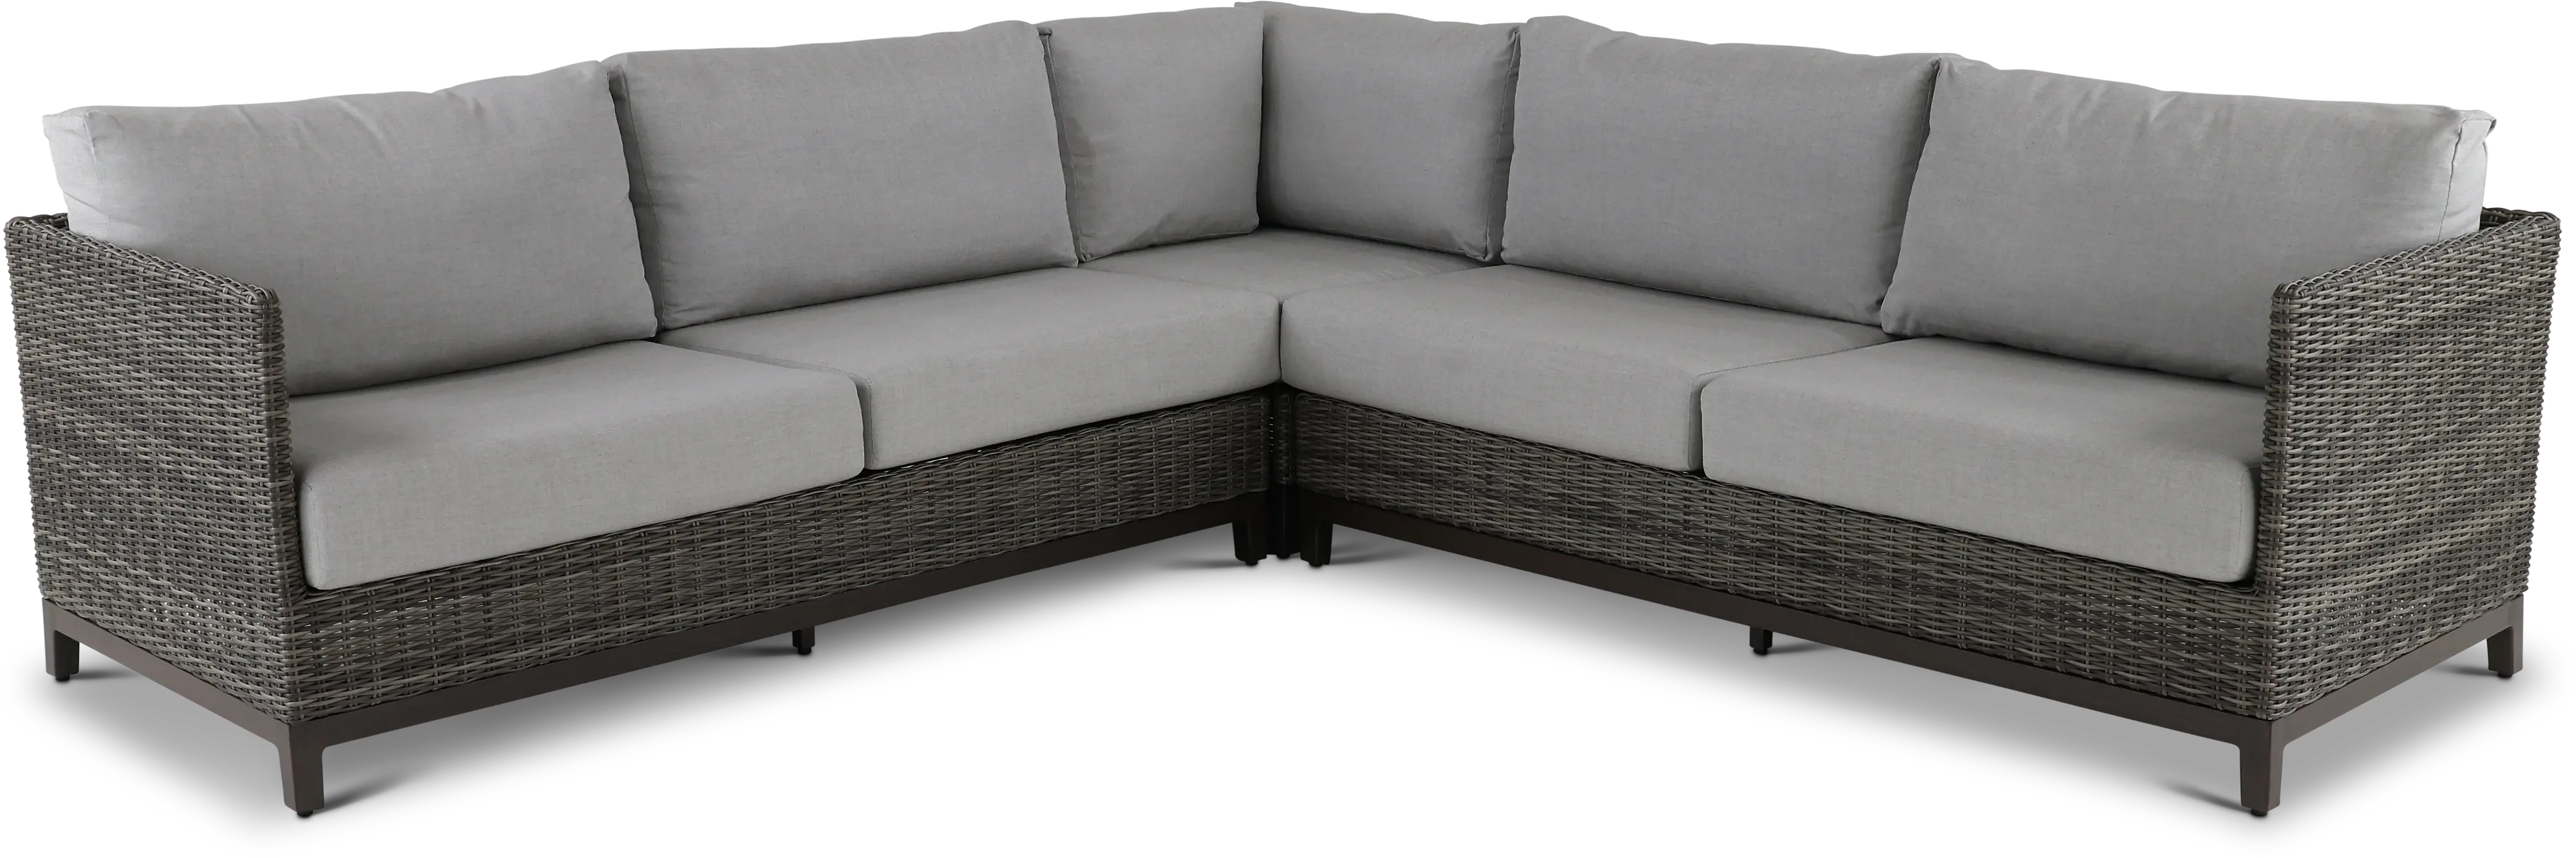 Nevis Woven Gray 3 Piece Patio Sectional with Sunbrella Fabric